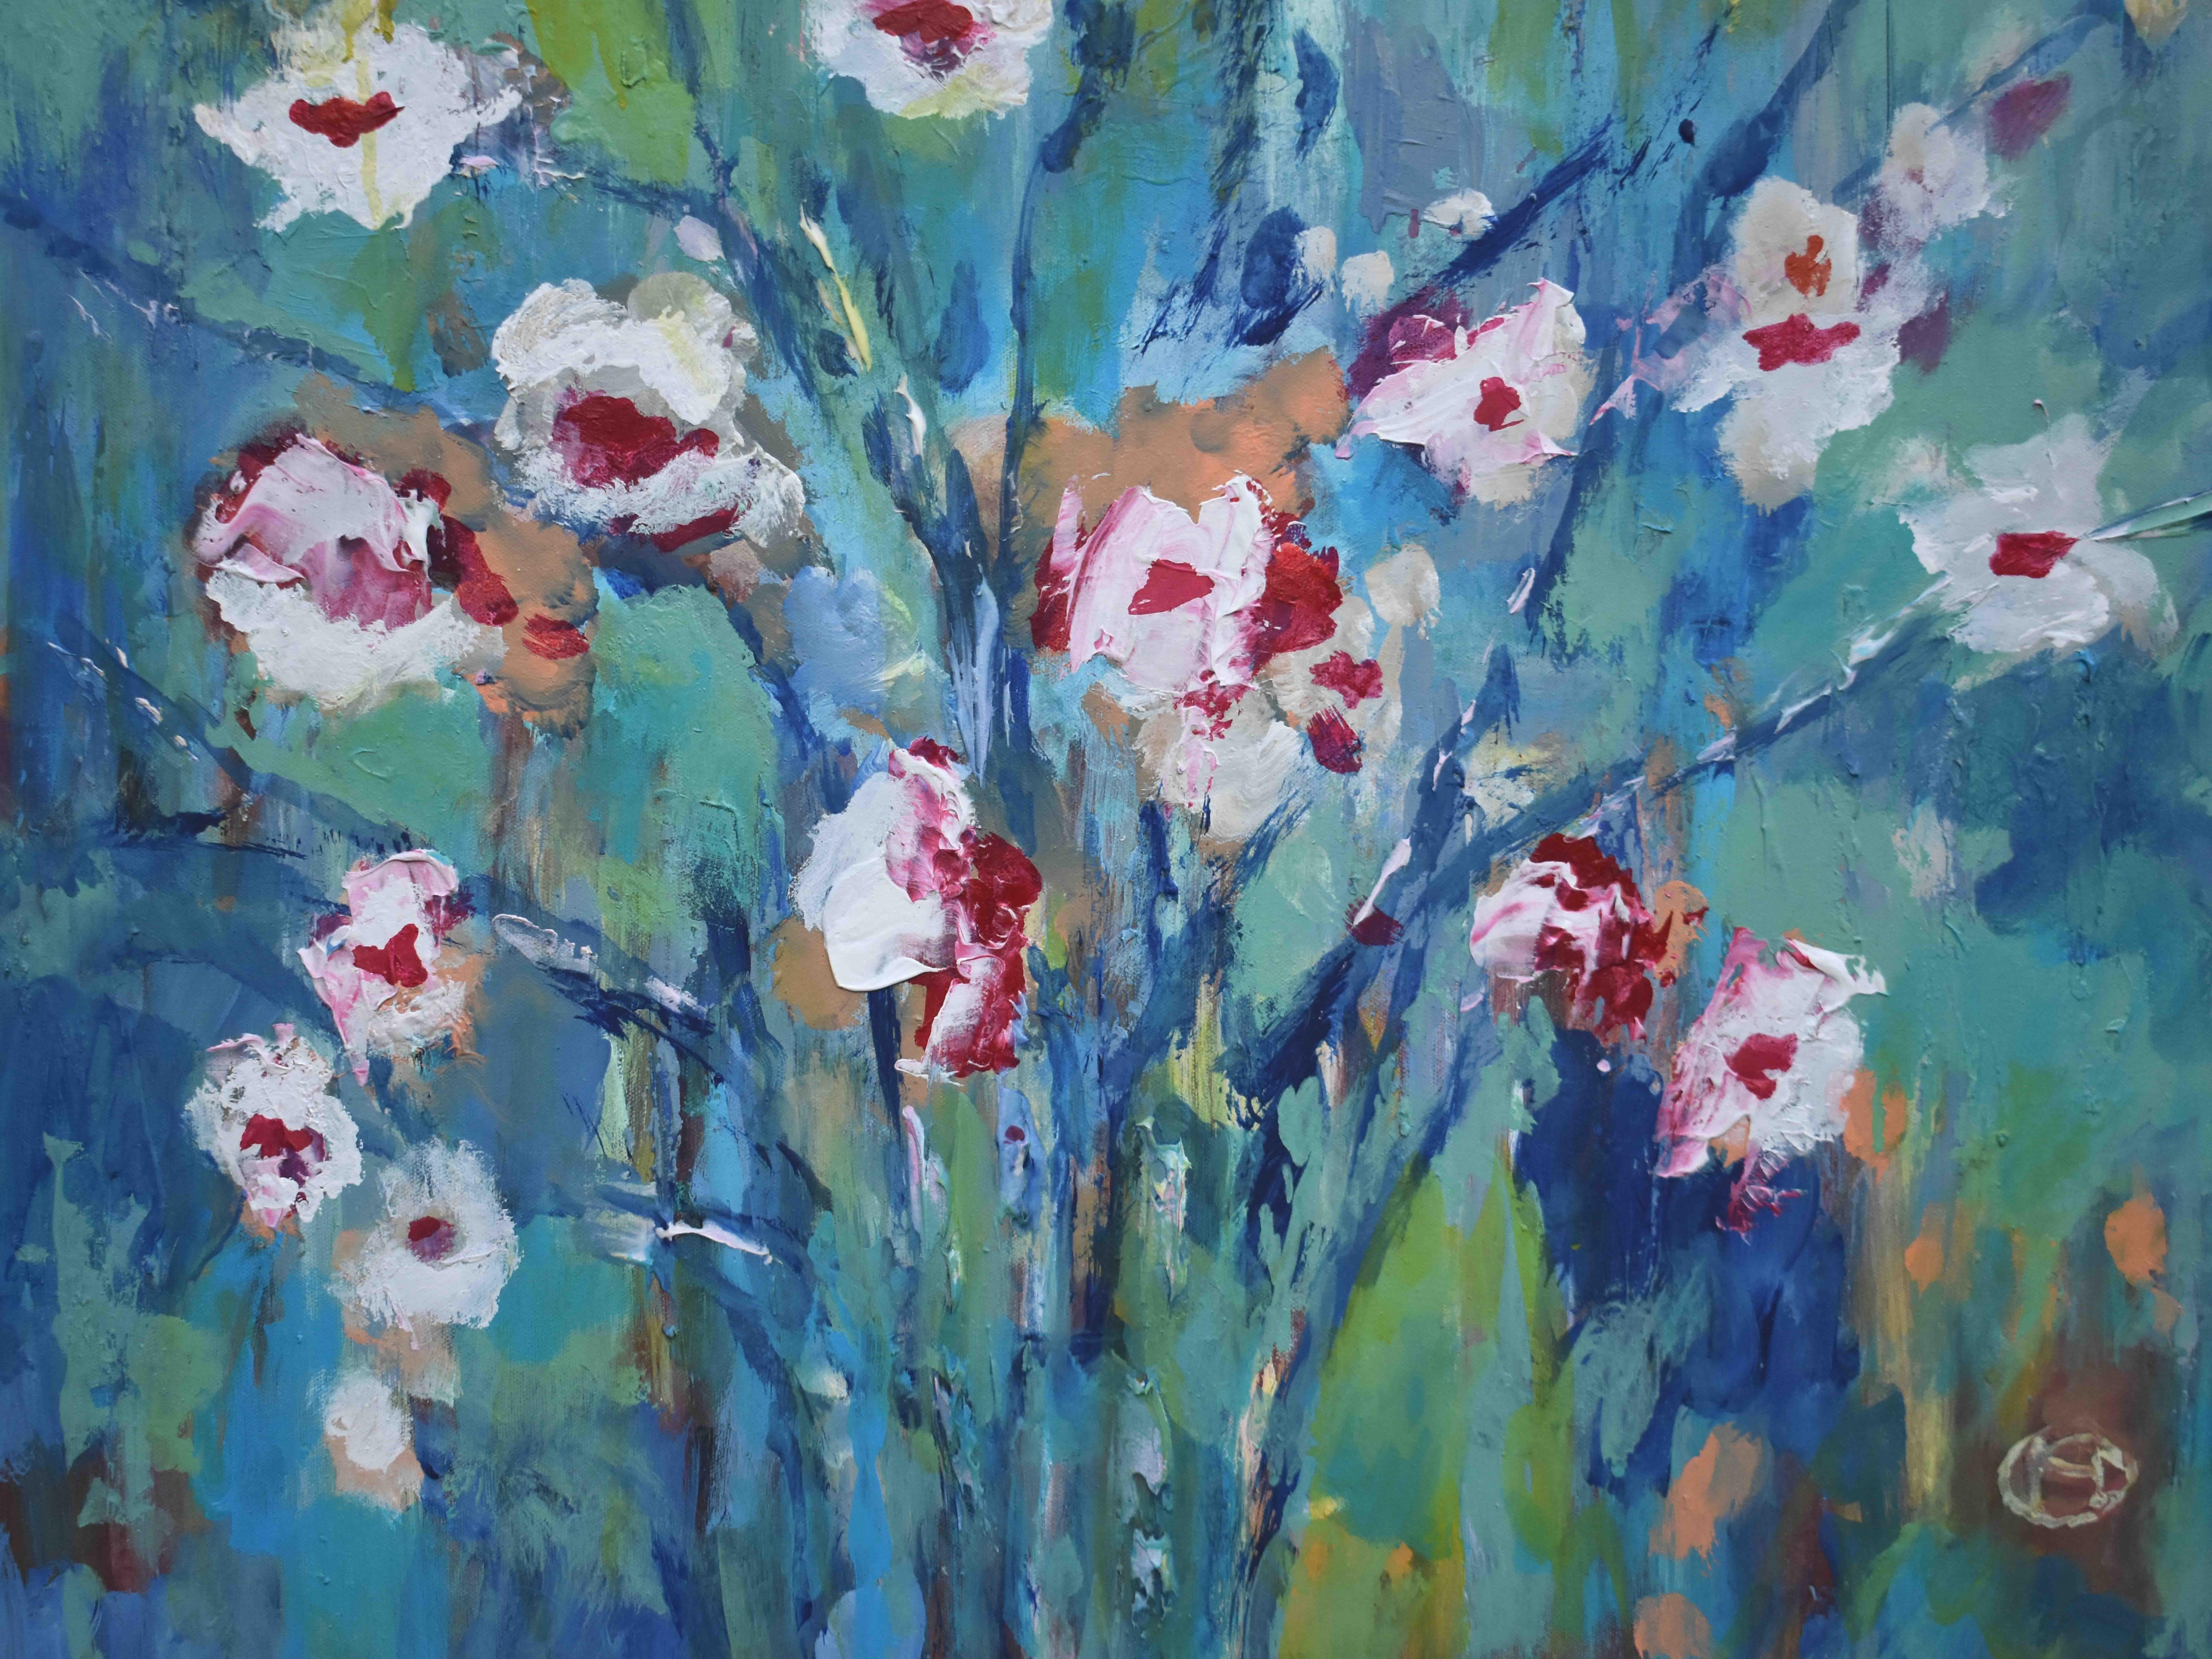 <p>Artist Comments<br>Artist Kip Decker demonstrates an expressionist still life of a joyful bouquet. Fresh blossoms spread out in a dainty burst, captured in the soft sunlight. 